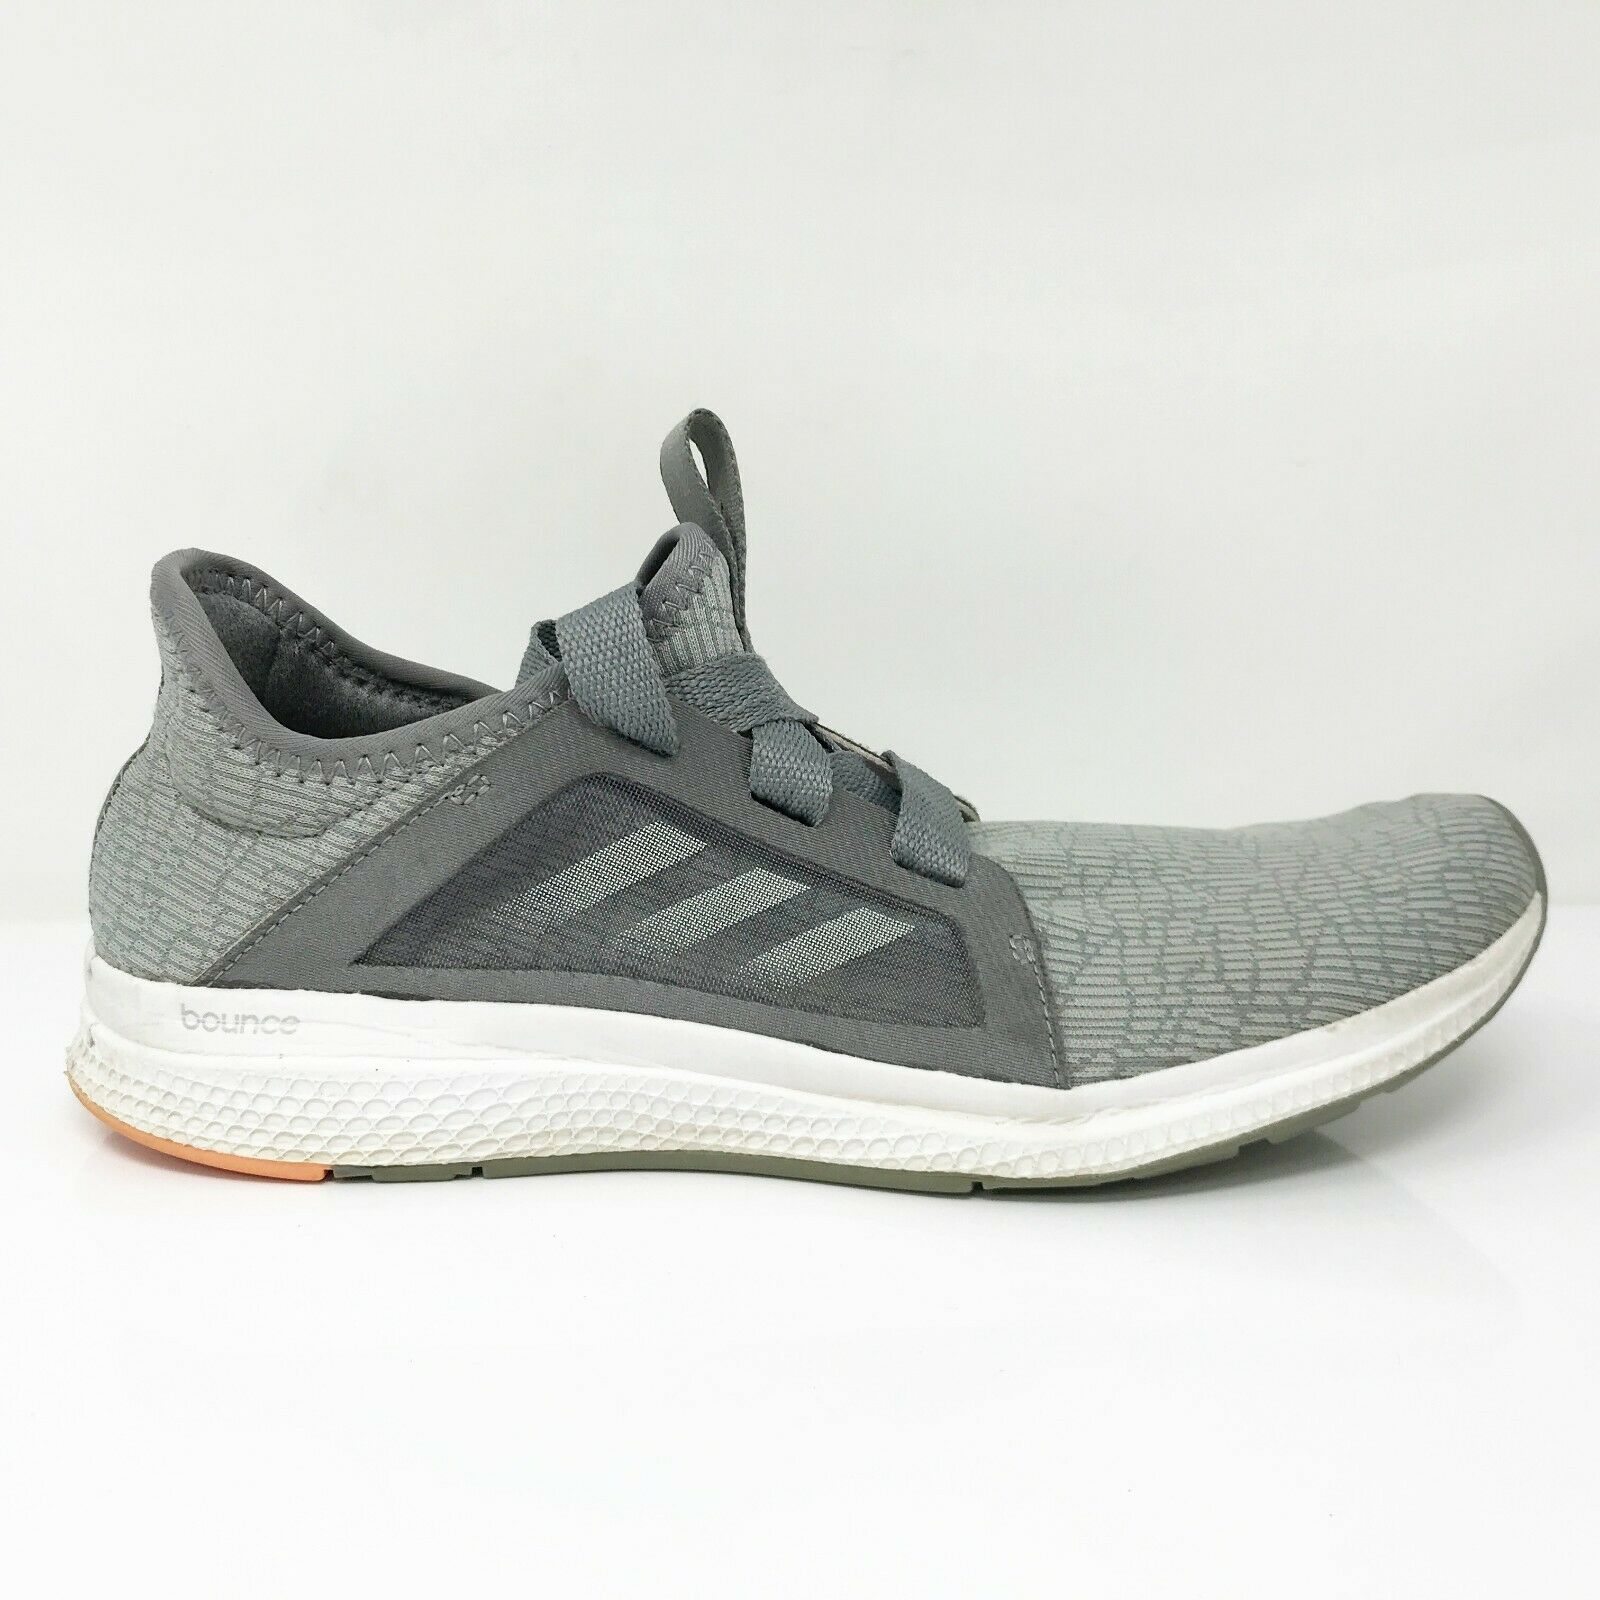 Adidas Womens Edge Lux BW1171 Gray Running Shoes Sneakers Size 9